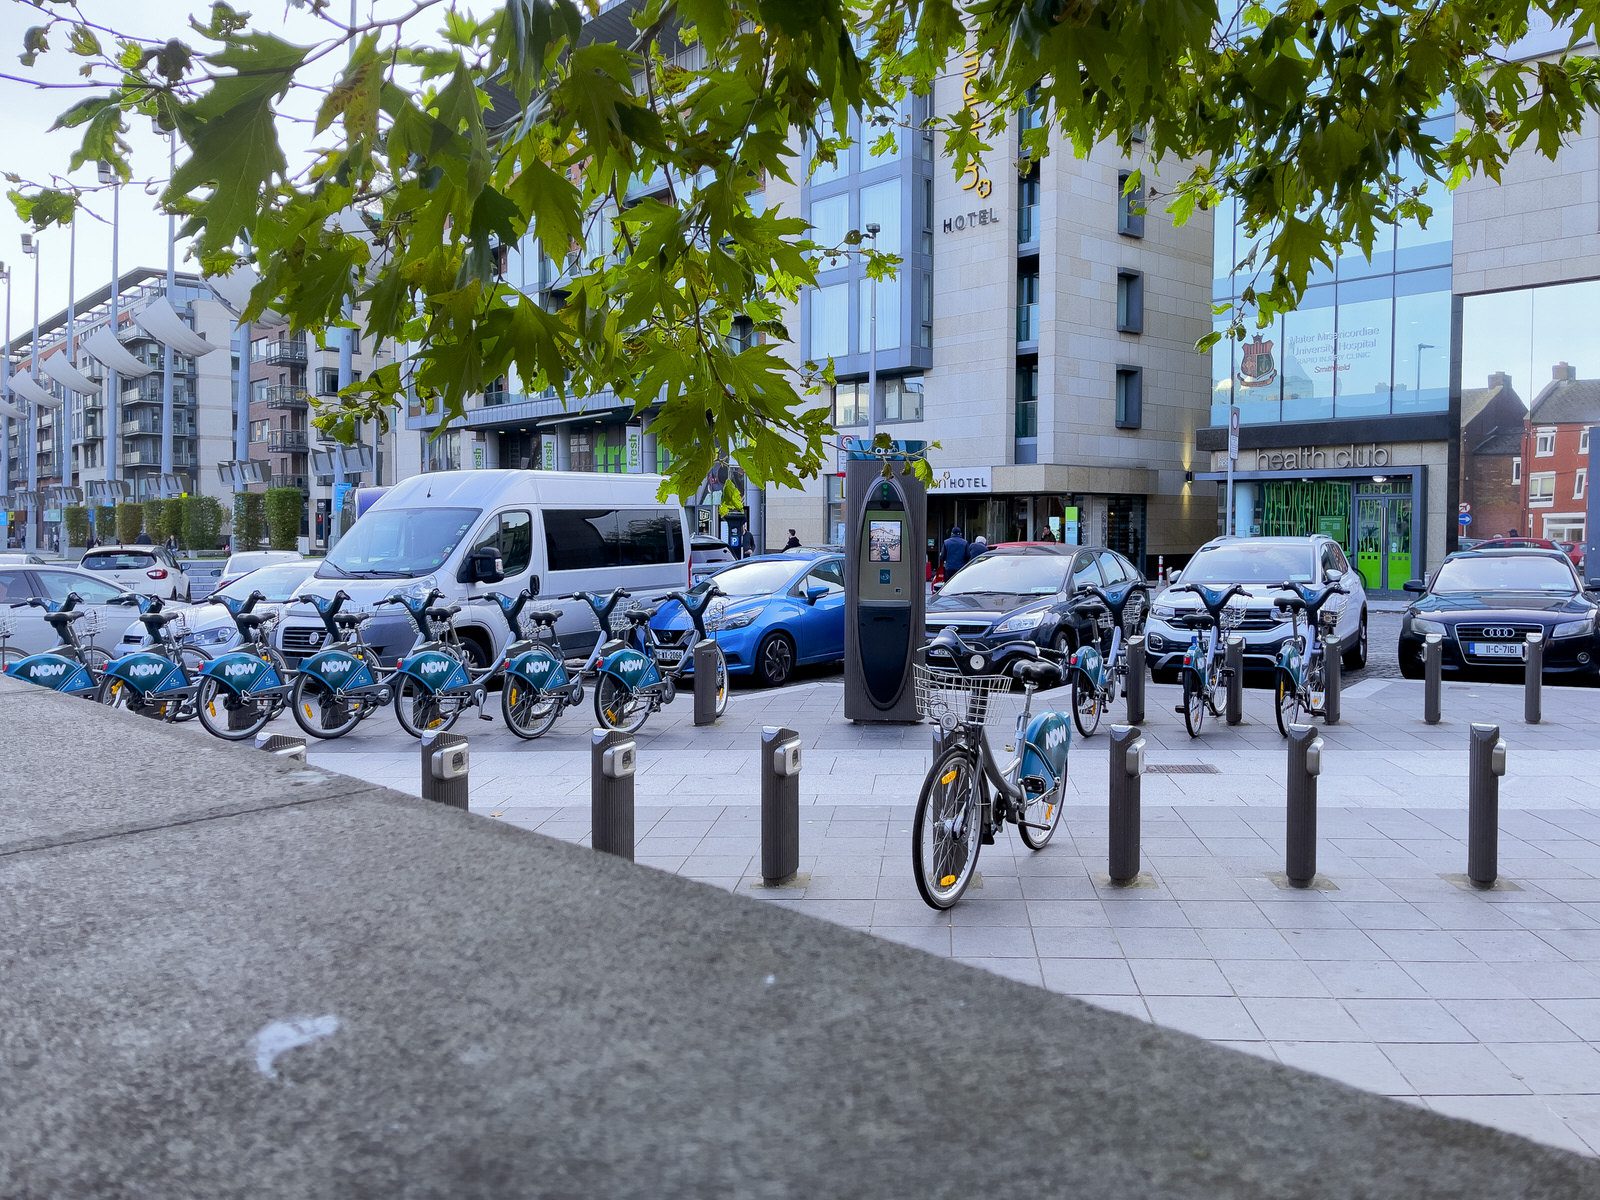 DUBLINBIKES DOCKING STATION 42 [SMITHFIELD PLAZA OR SQUARE - CHOOSE WHICH YOU PREFER] 008